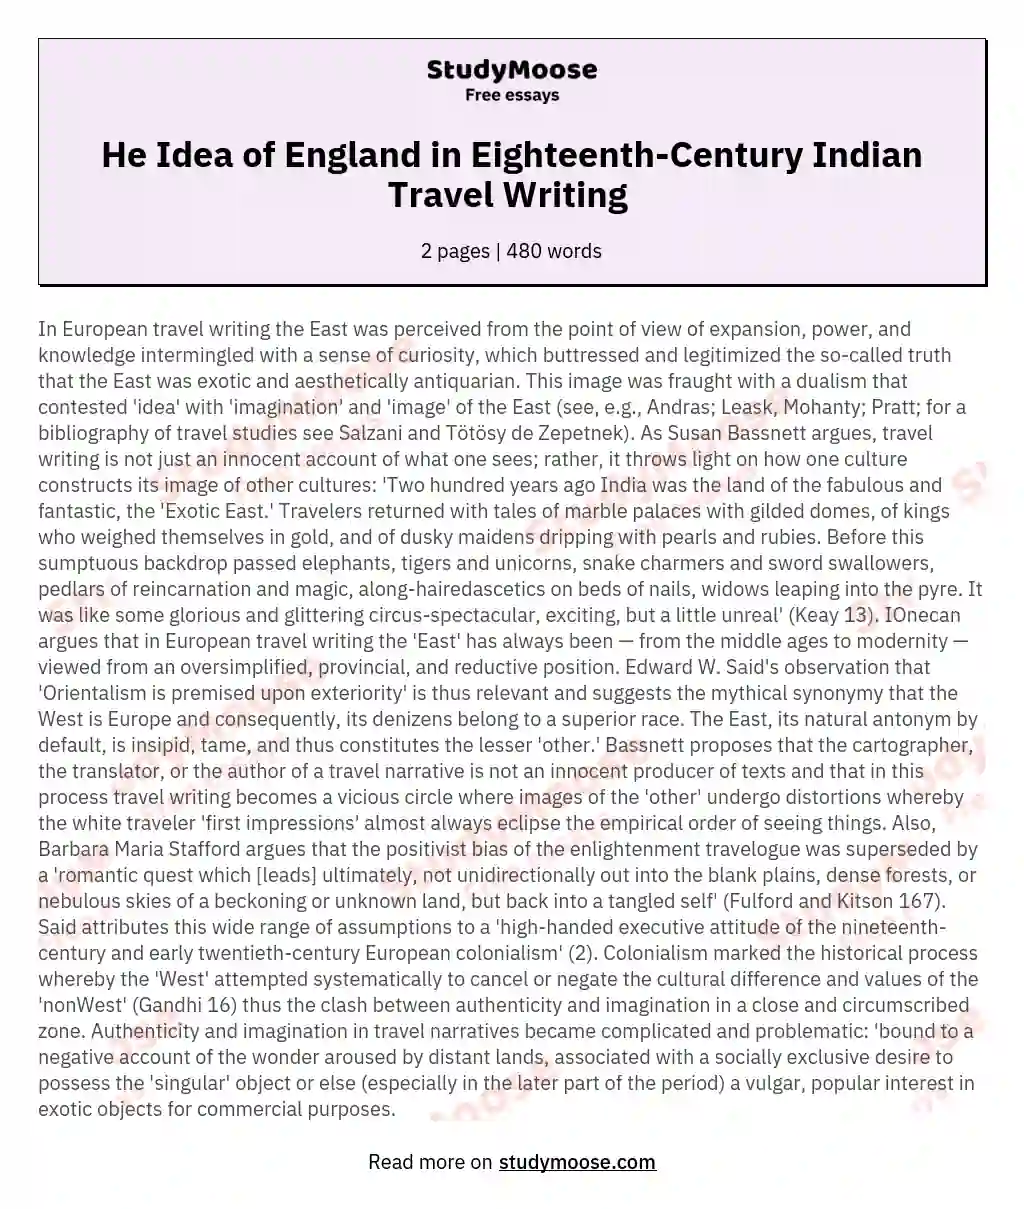 He Idea of England in Eighteenth-Century Indian Travel Writing  essay